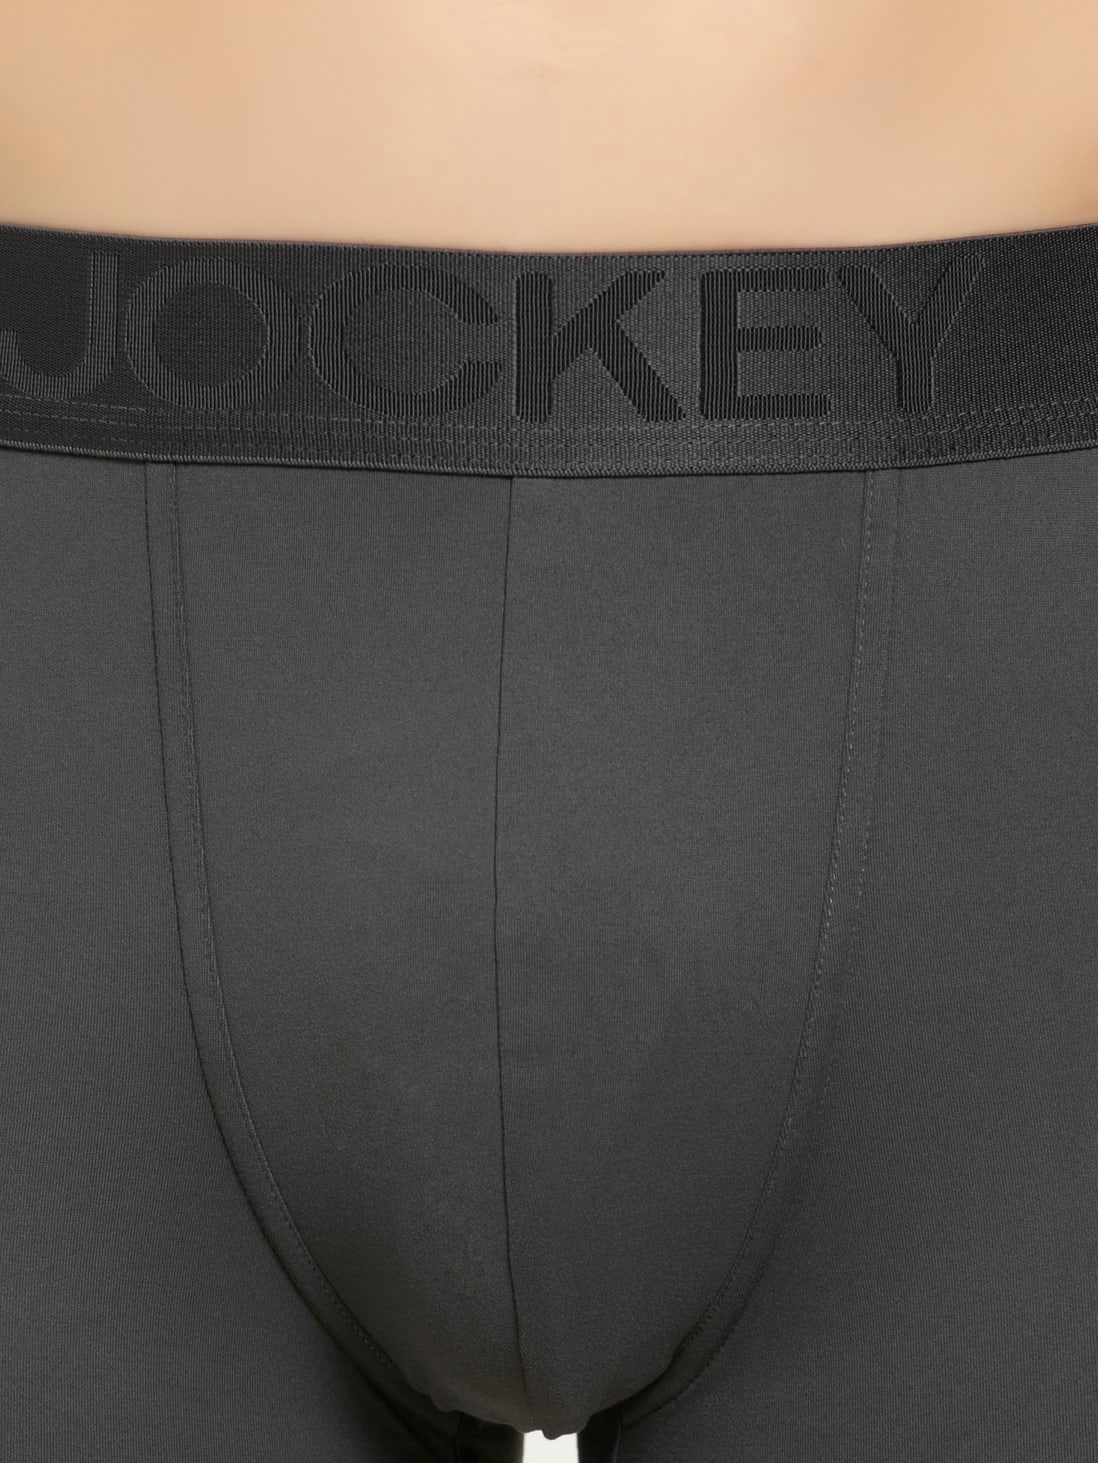 Buy Ebony Ultra Soft Micro Fiber Trunks With Double Layer Contoured